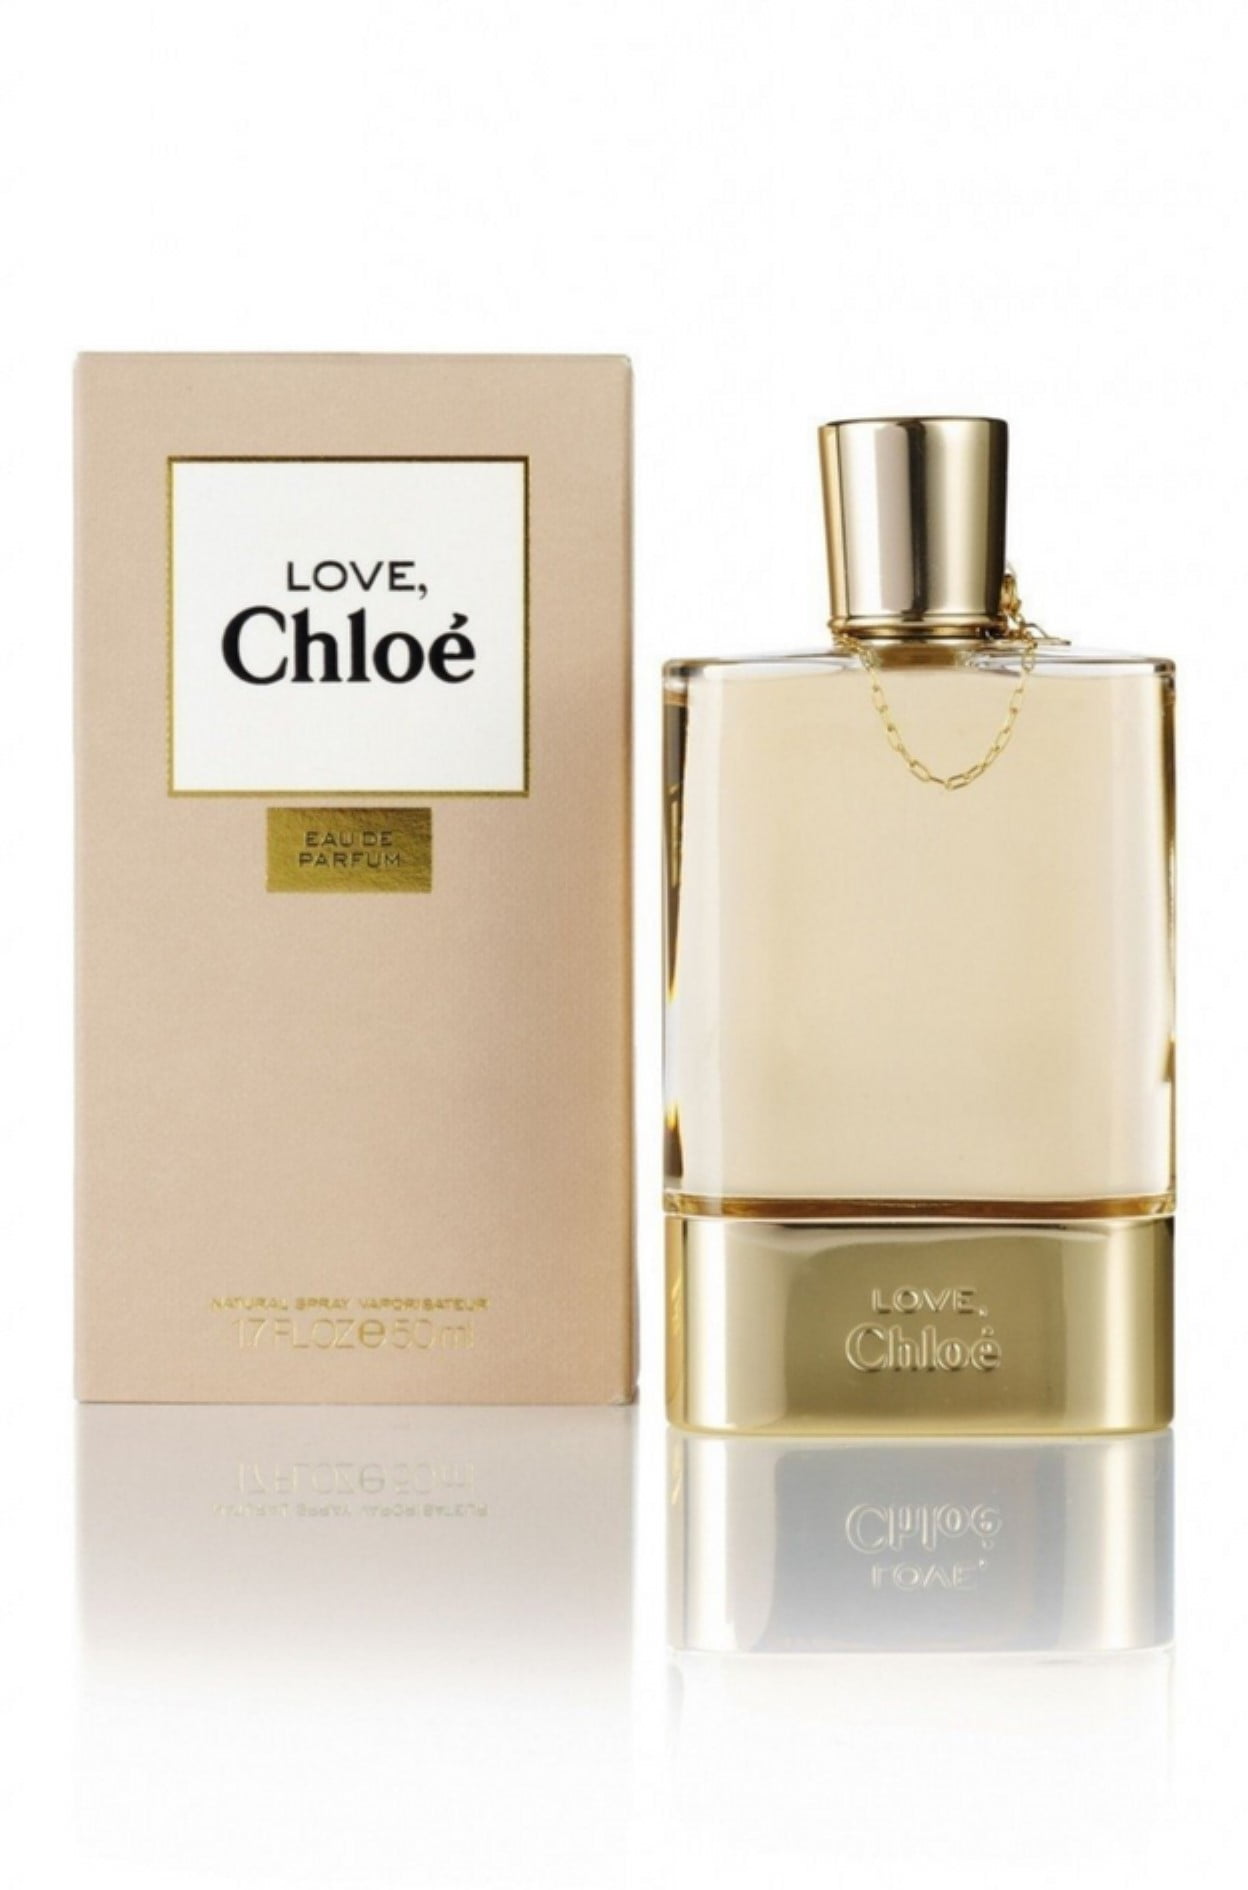 Chloe For Her Perfume | escapeauthority.com